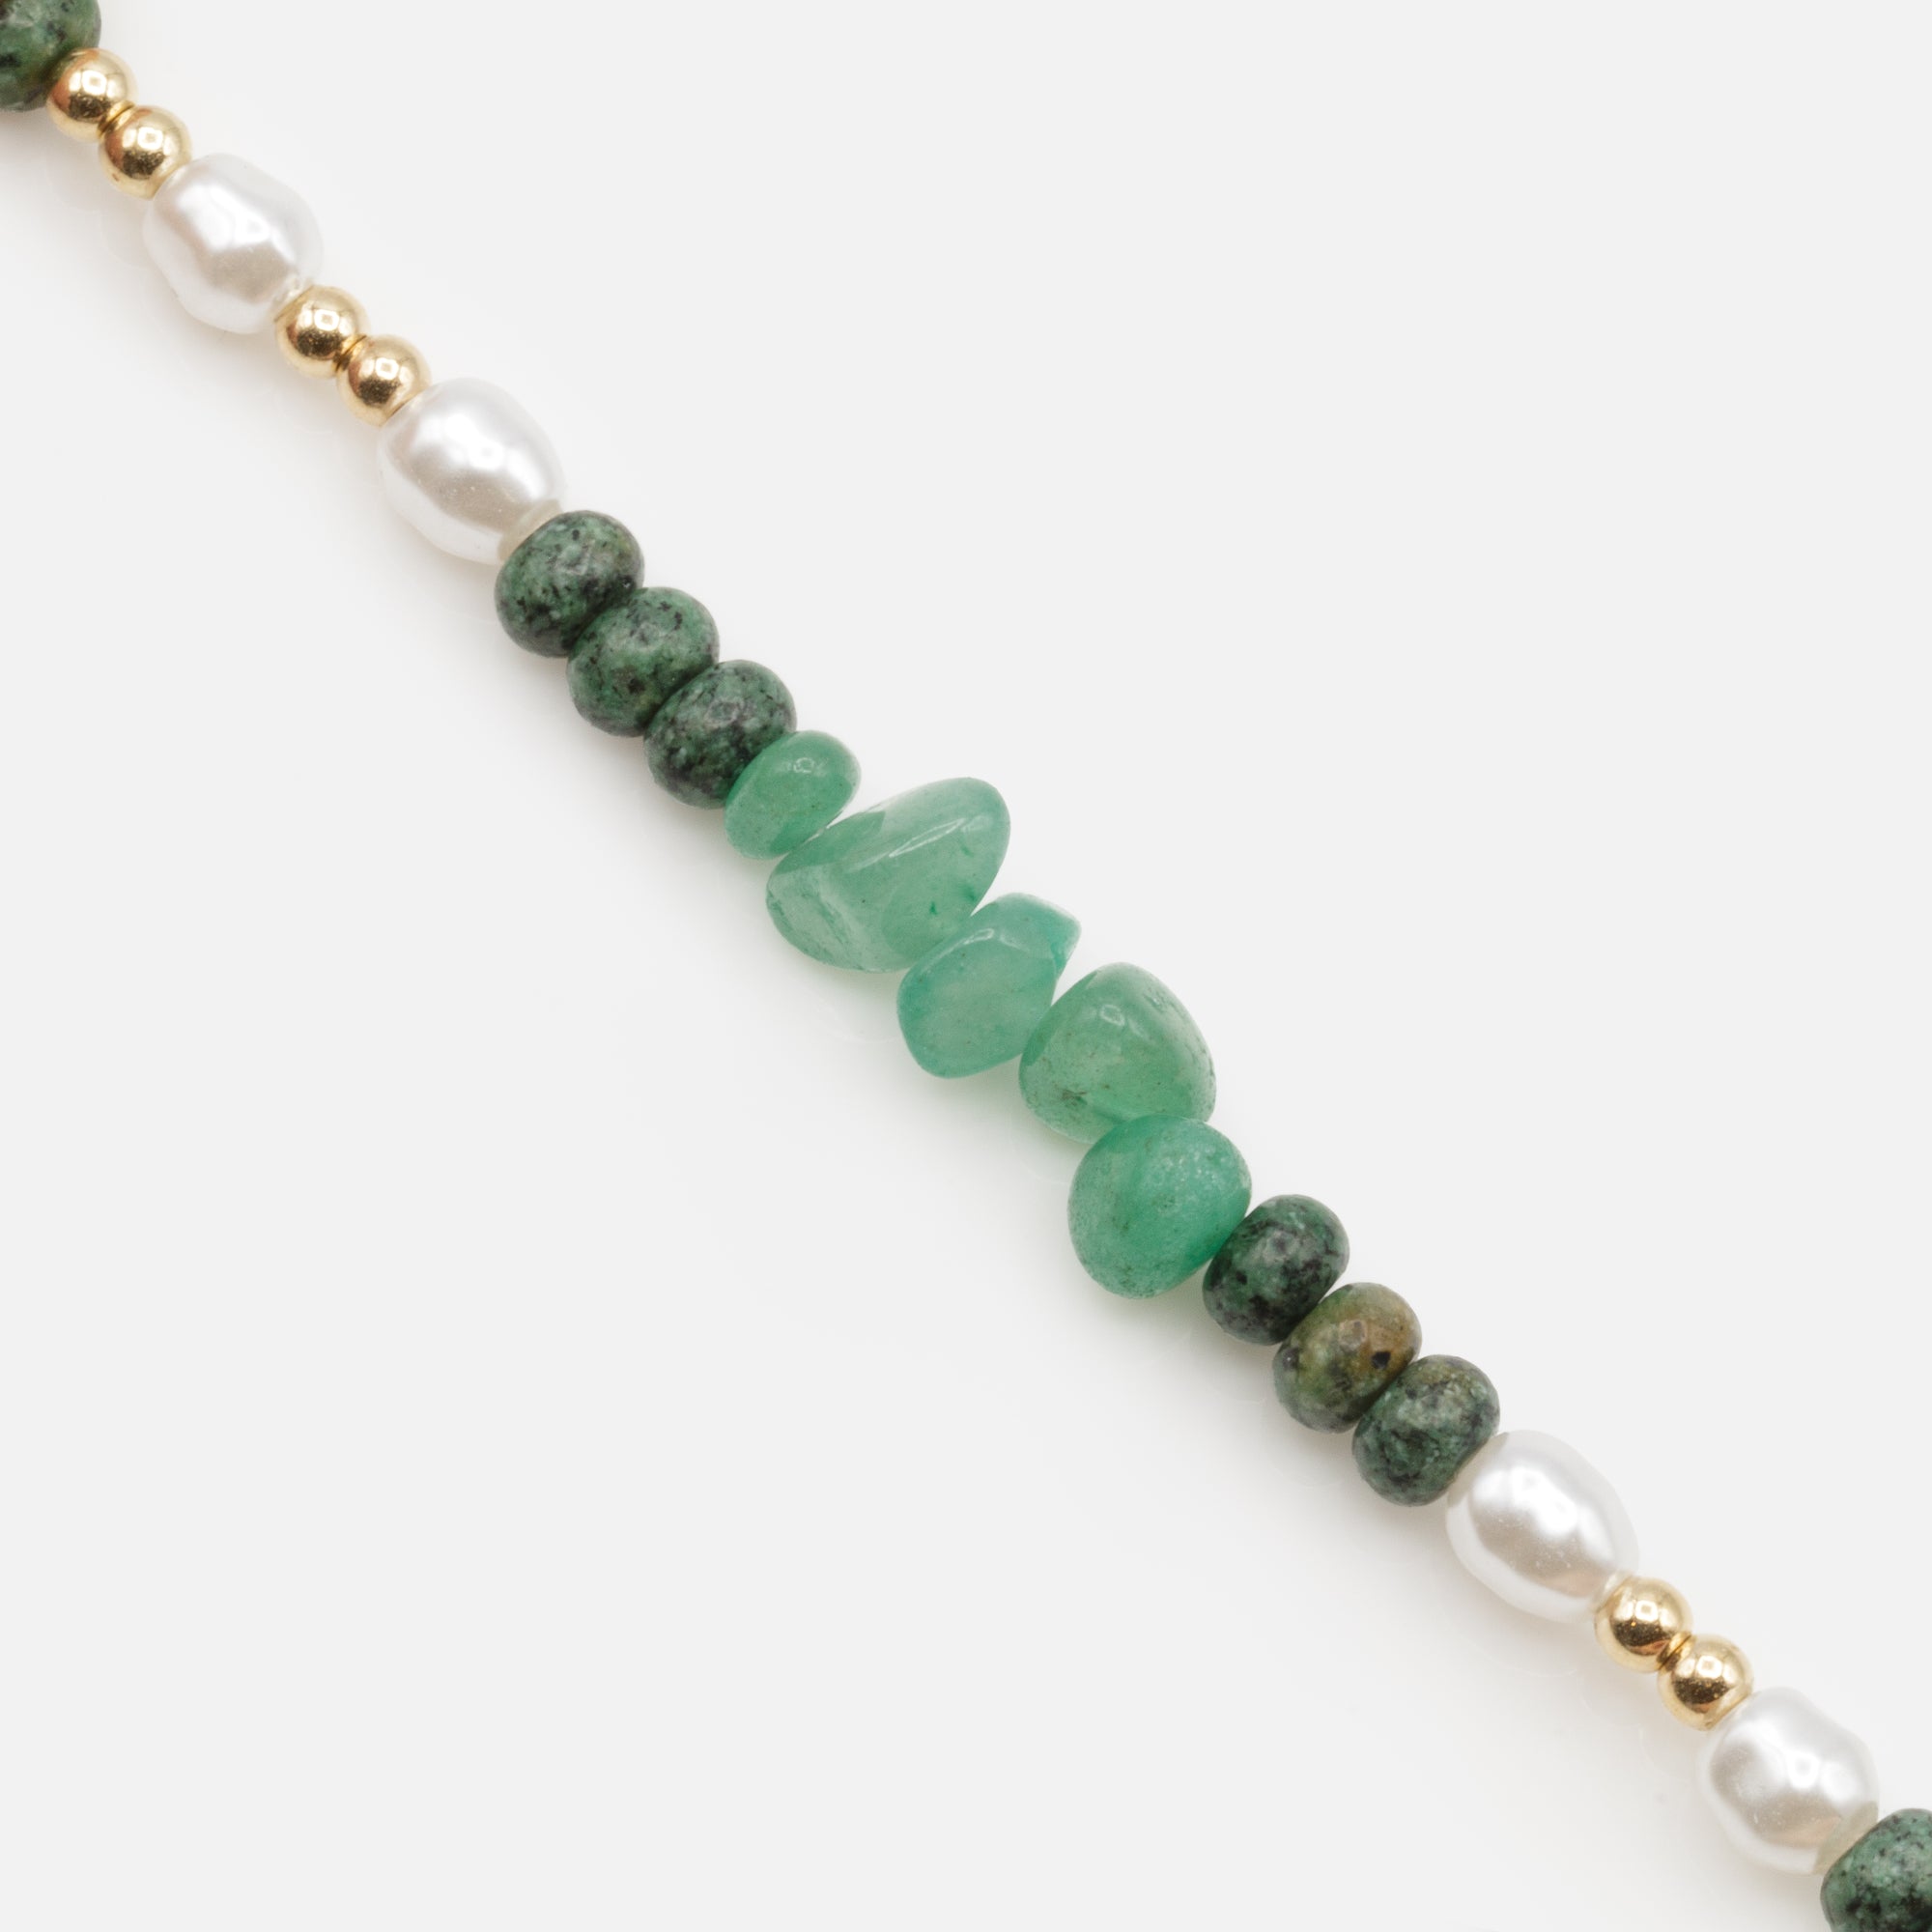 Green stone bracelet with pearls and golden beads